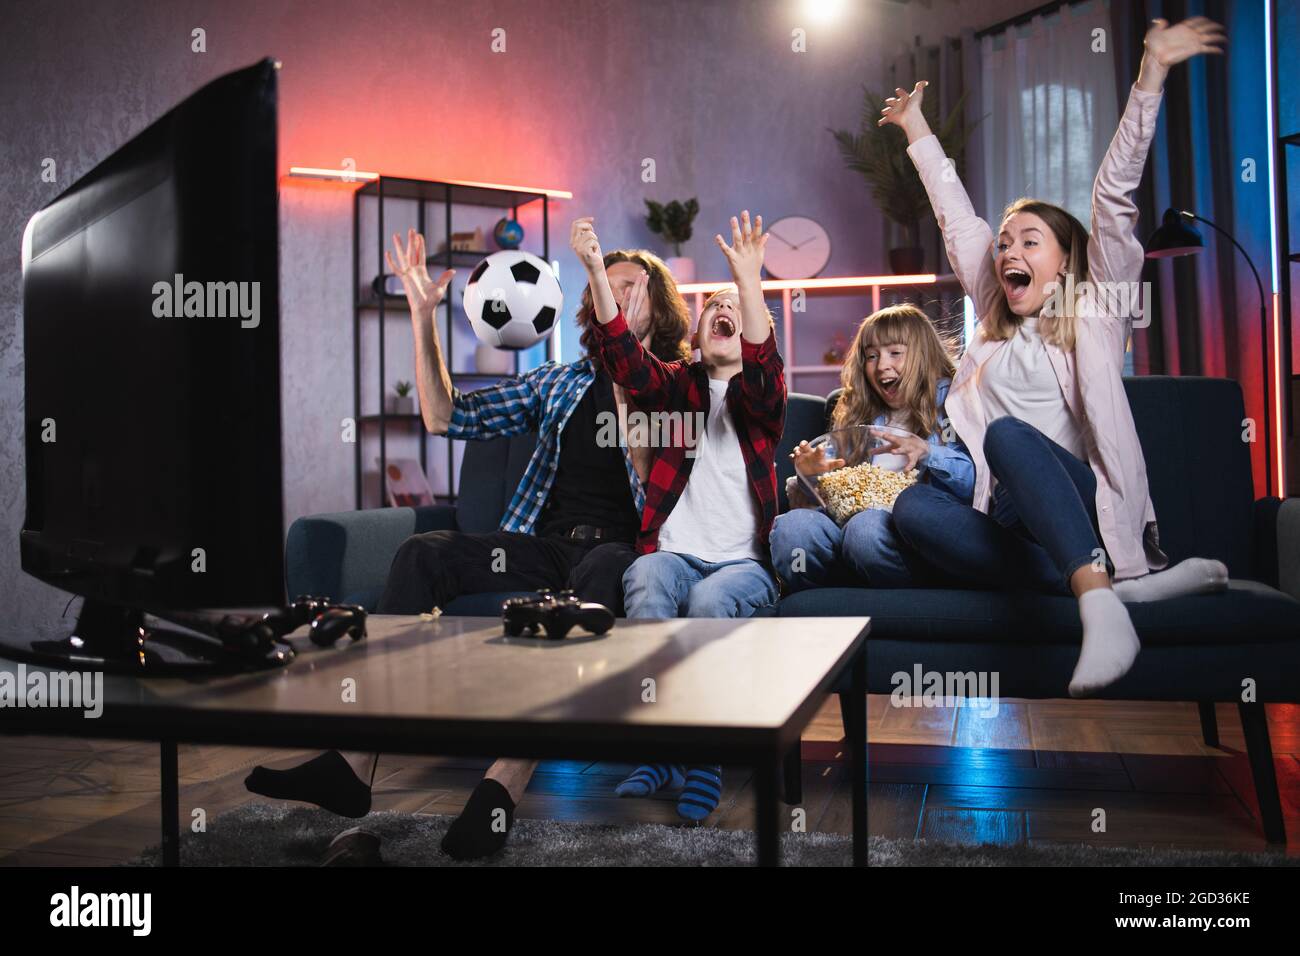 Emotional parents with little son and daughter celebrating goal of favorite team during soccer match. Satisfied family sitting on couch and watching sport competition on TV. Stock Photo